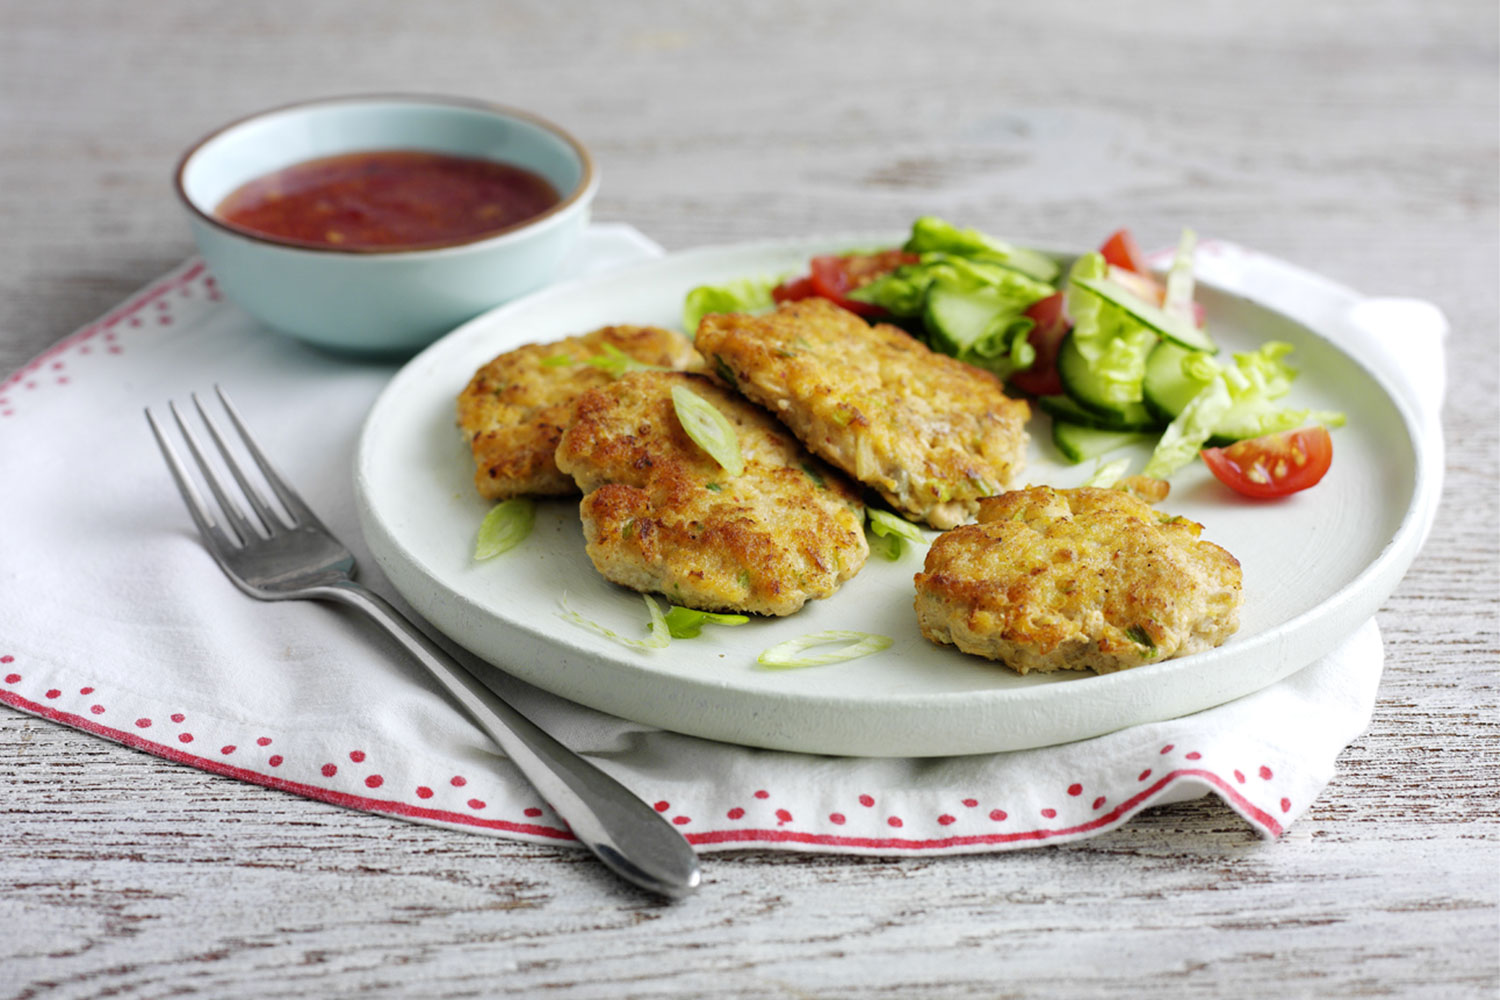 Thai-style fish cakes with mango slaw - Healthy Food Guide